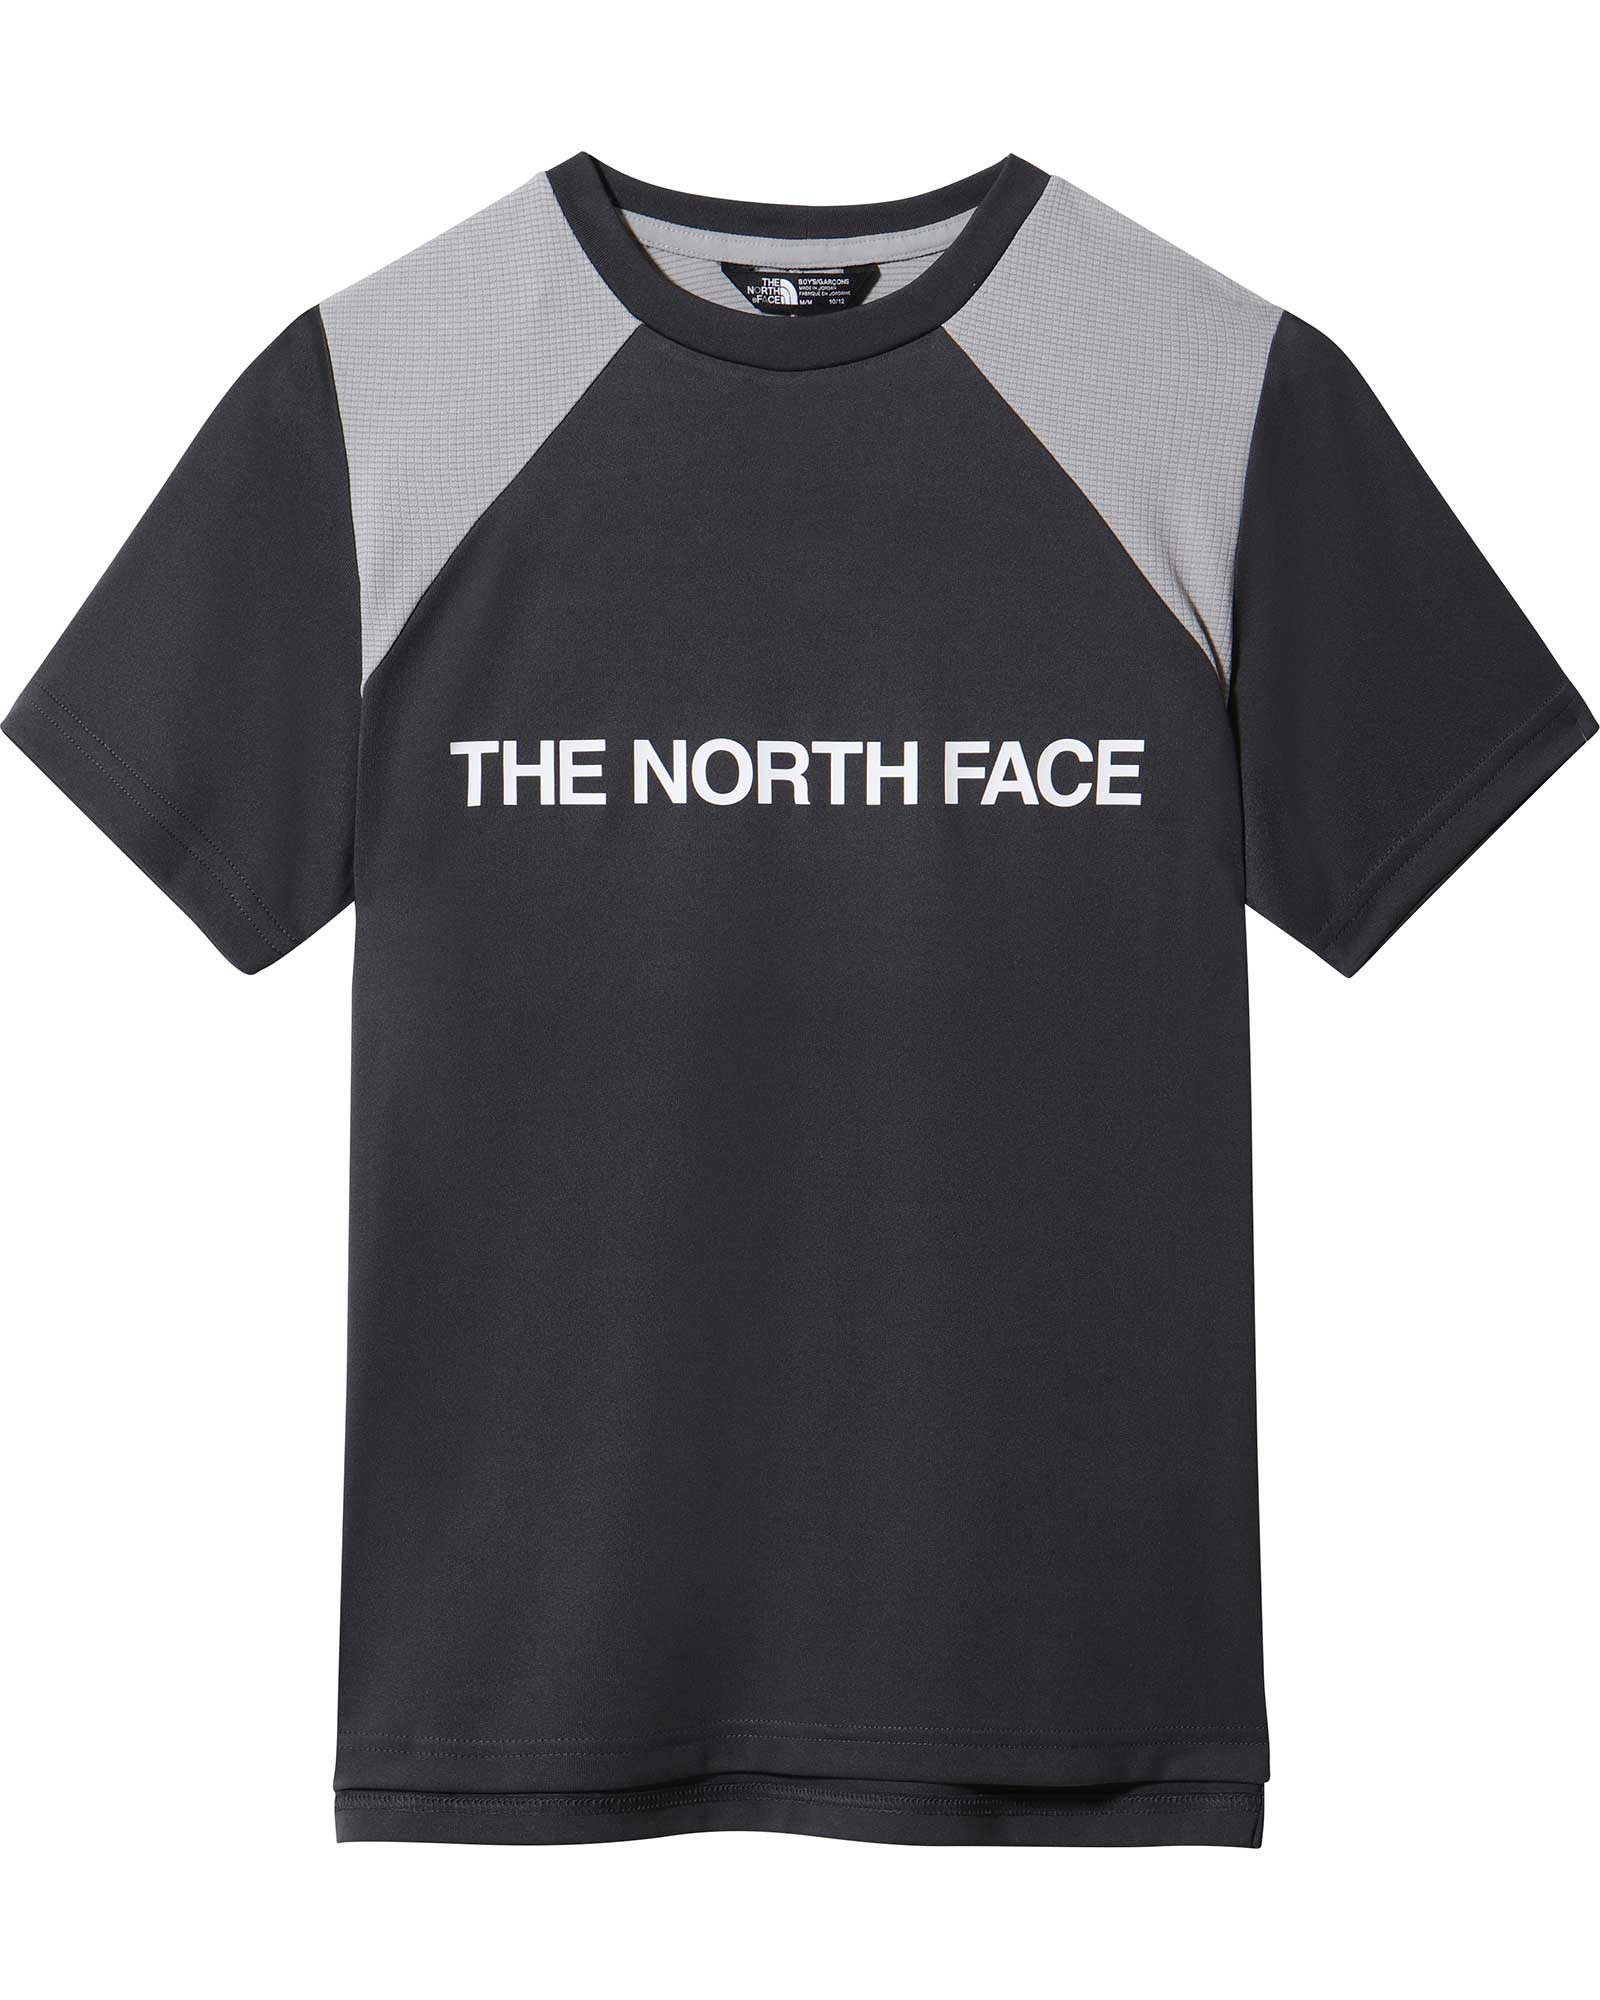 The North Face Never Stop Boys T-shirt